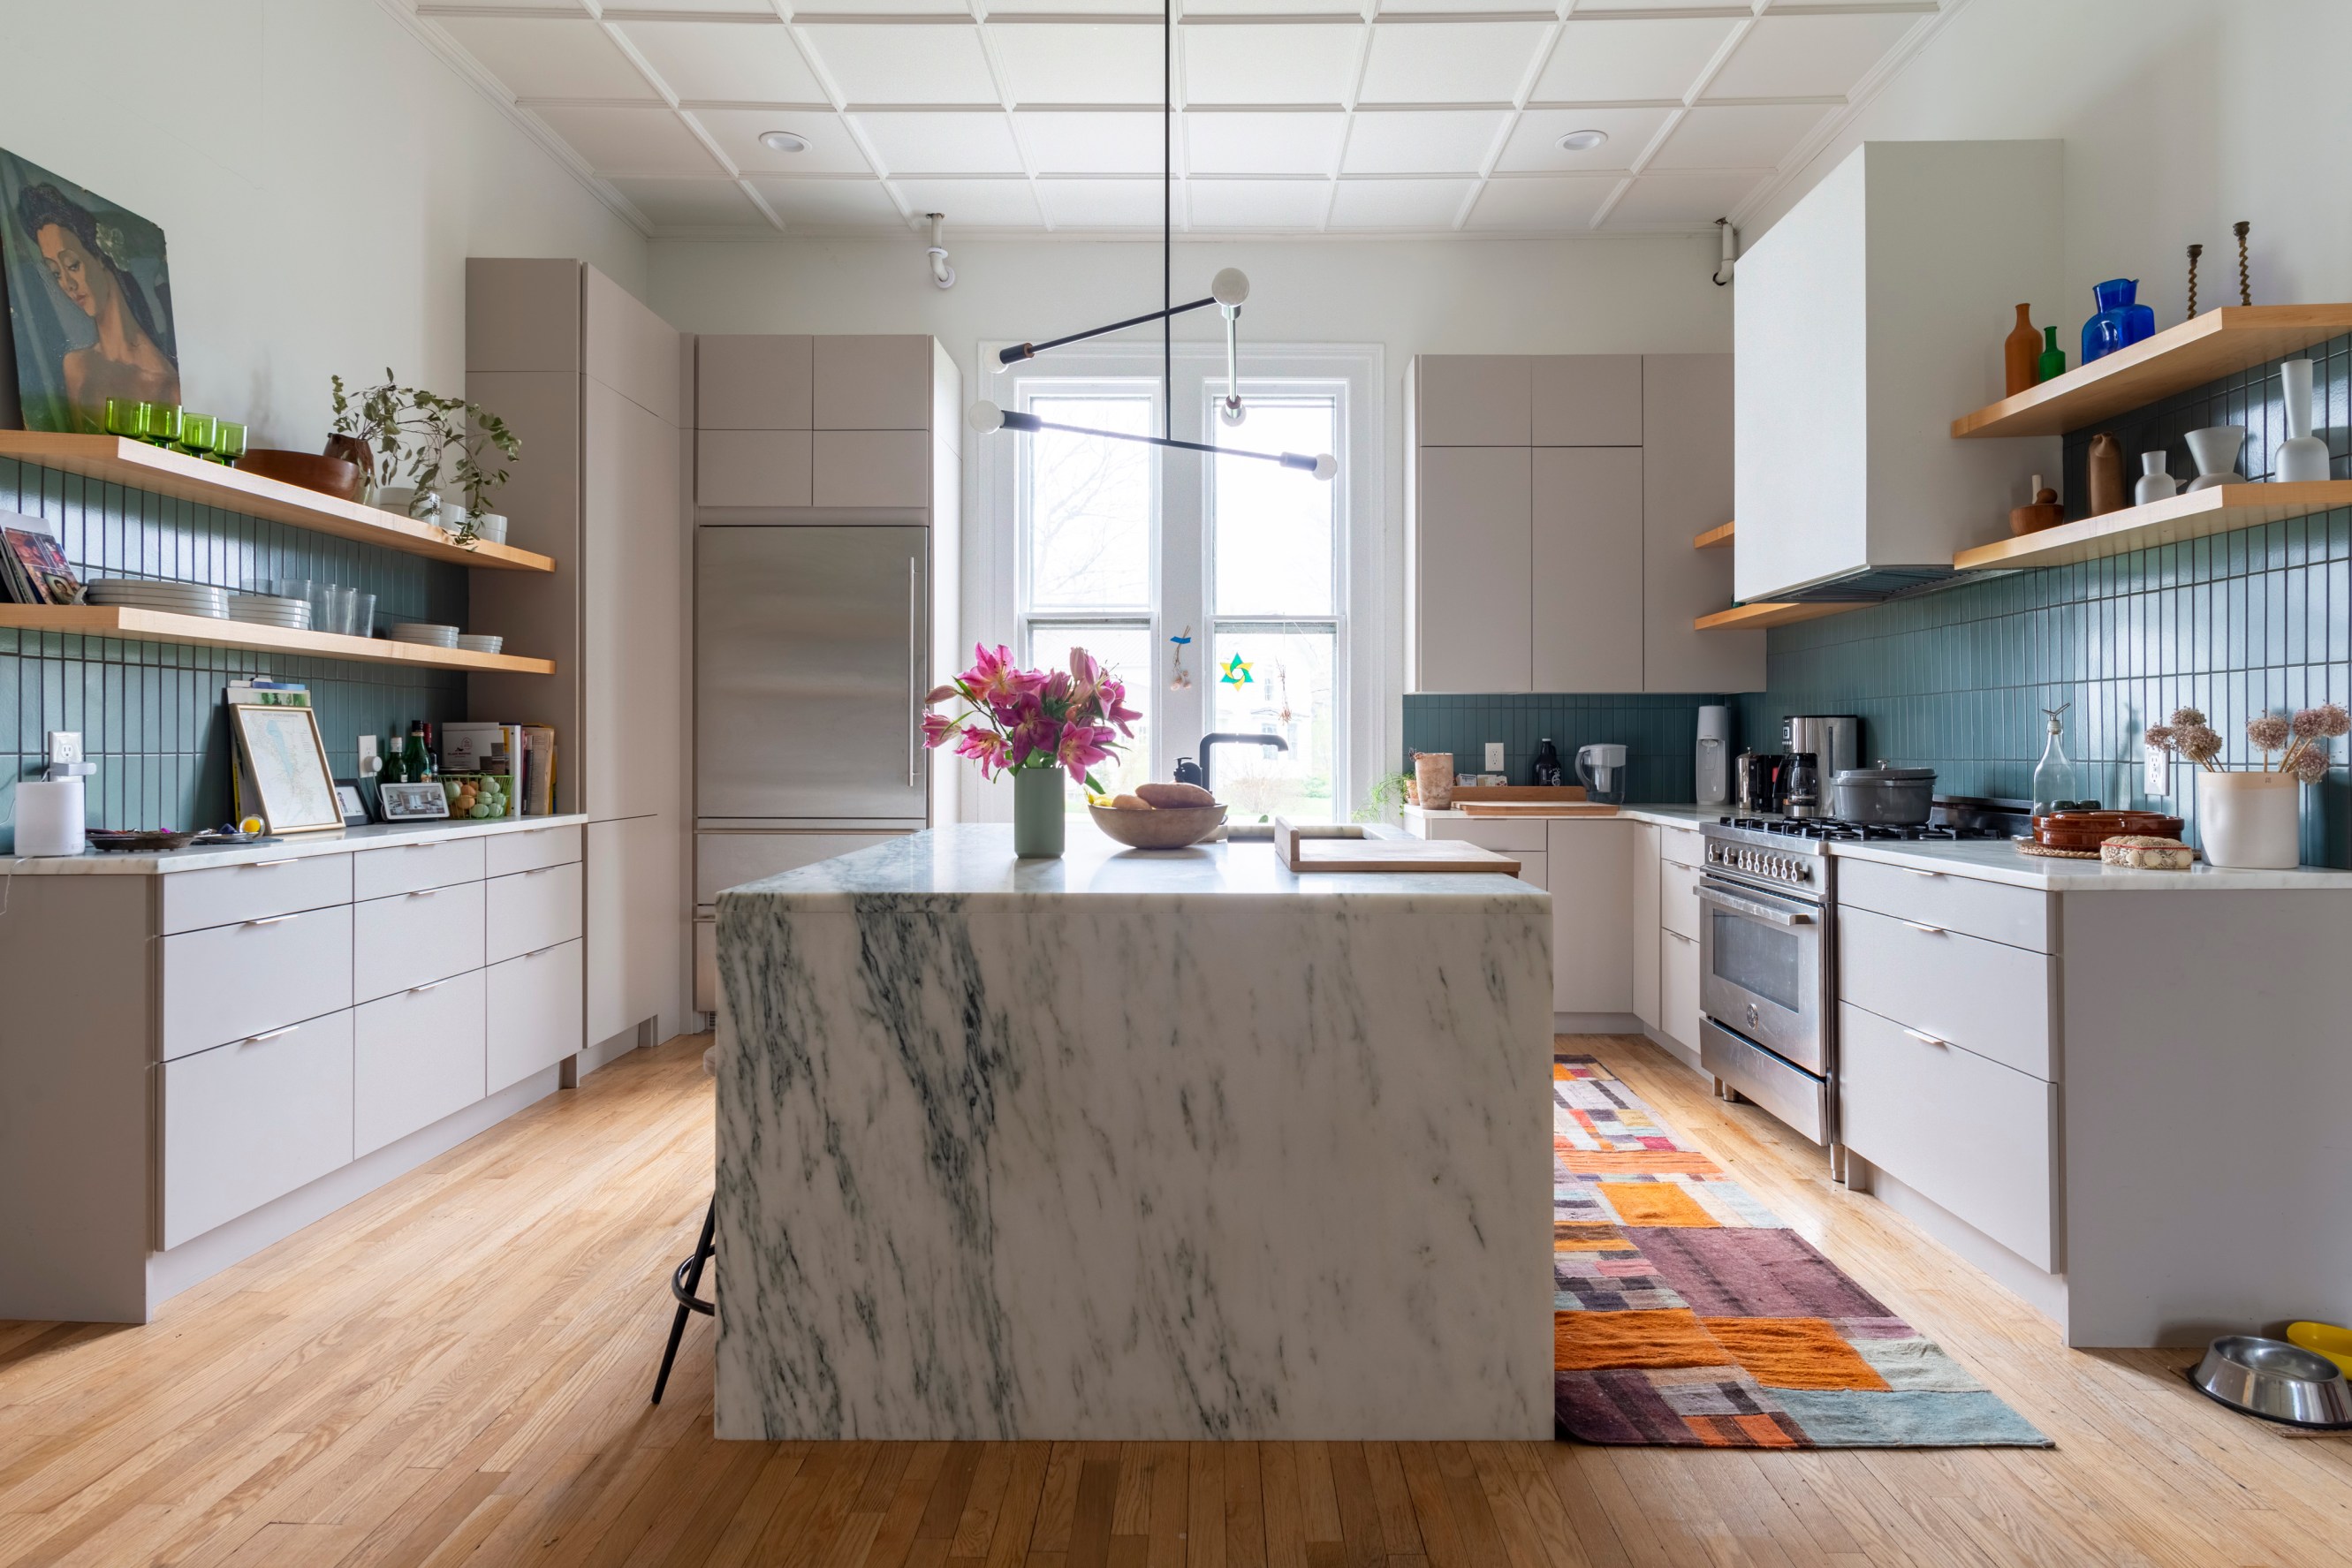 Bright and airy kitchen, with a white marble or quartz island and an industrial light fixture above it. Island is flanked by white countertops with robin's egg tile backsplash.